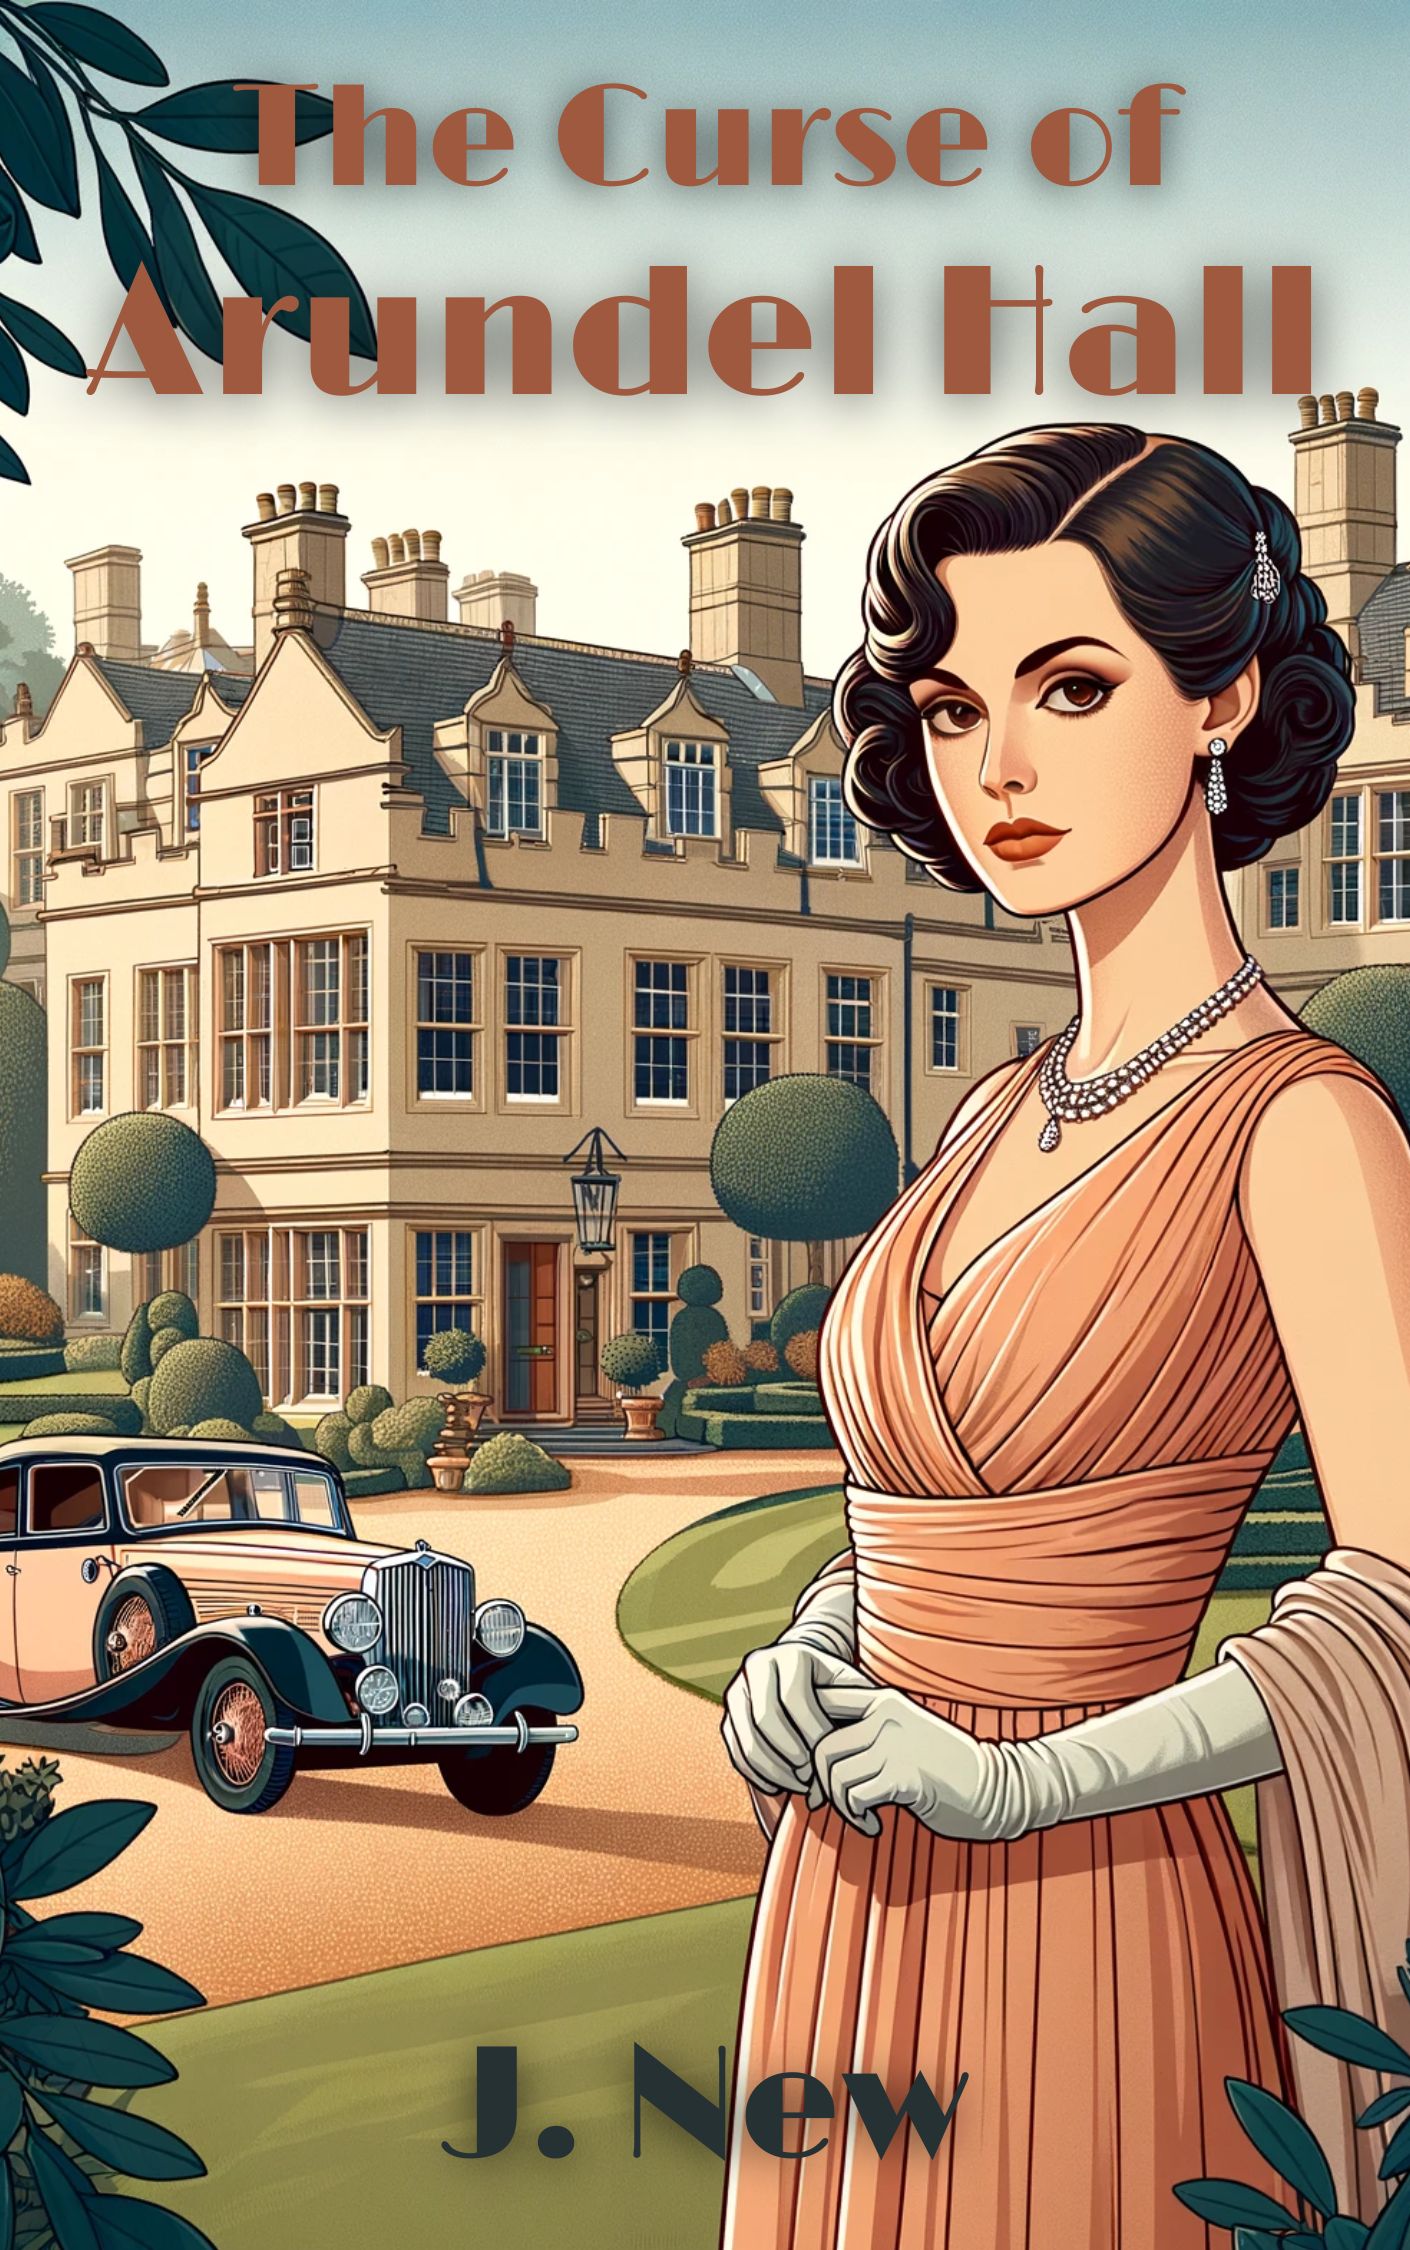 The Curse of Arundel Hall book 2 in the hugely popular British Historical 1930s cozy mystery series by author J. New